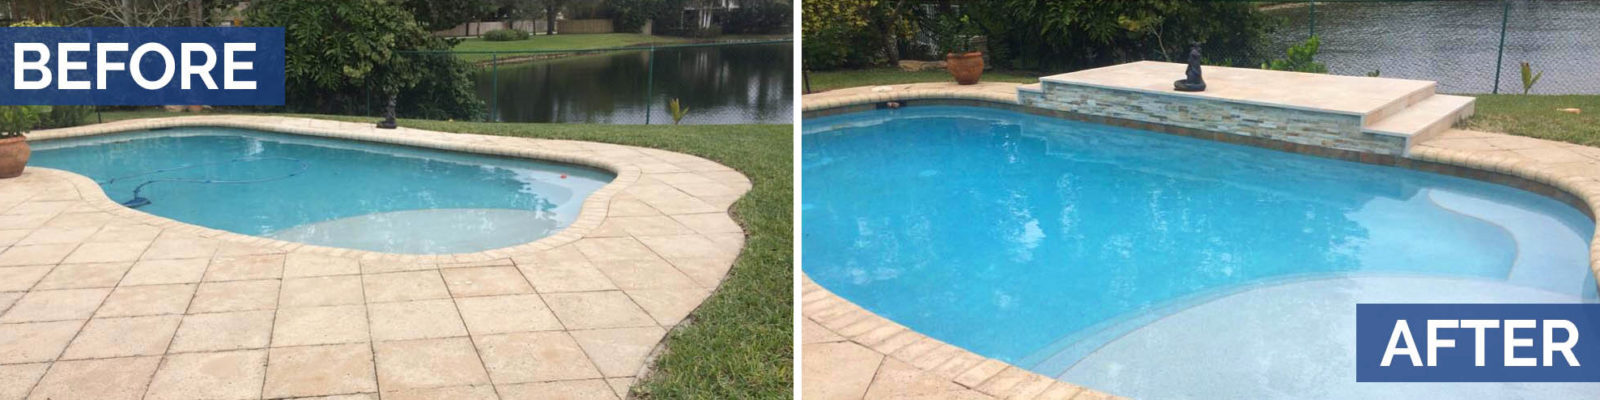 pool remodling dade county